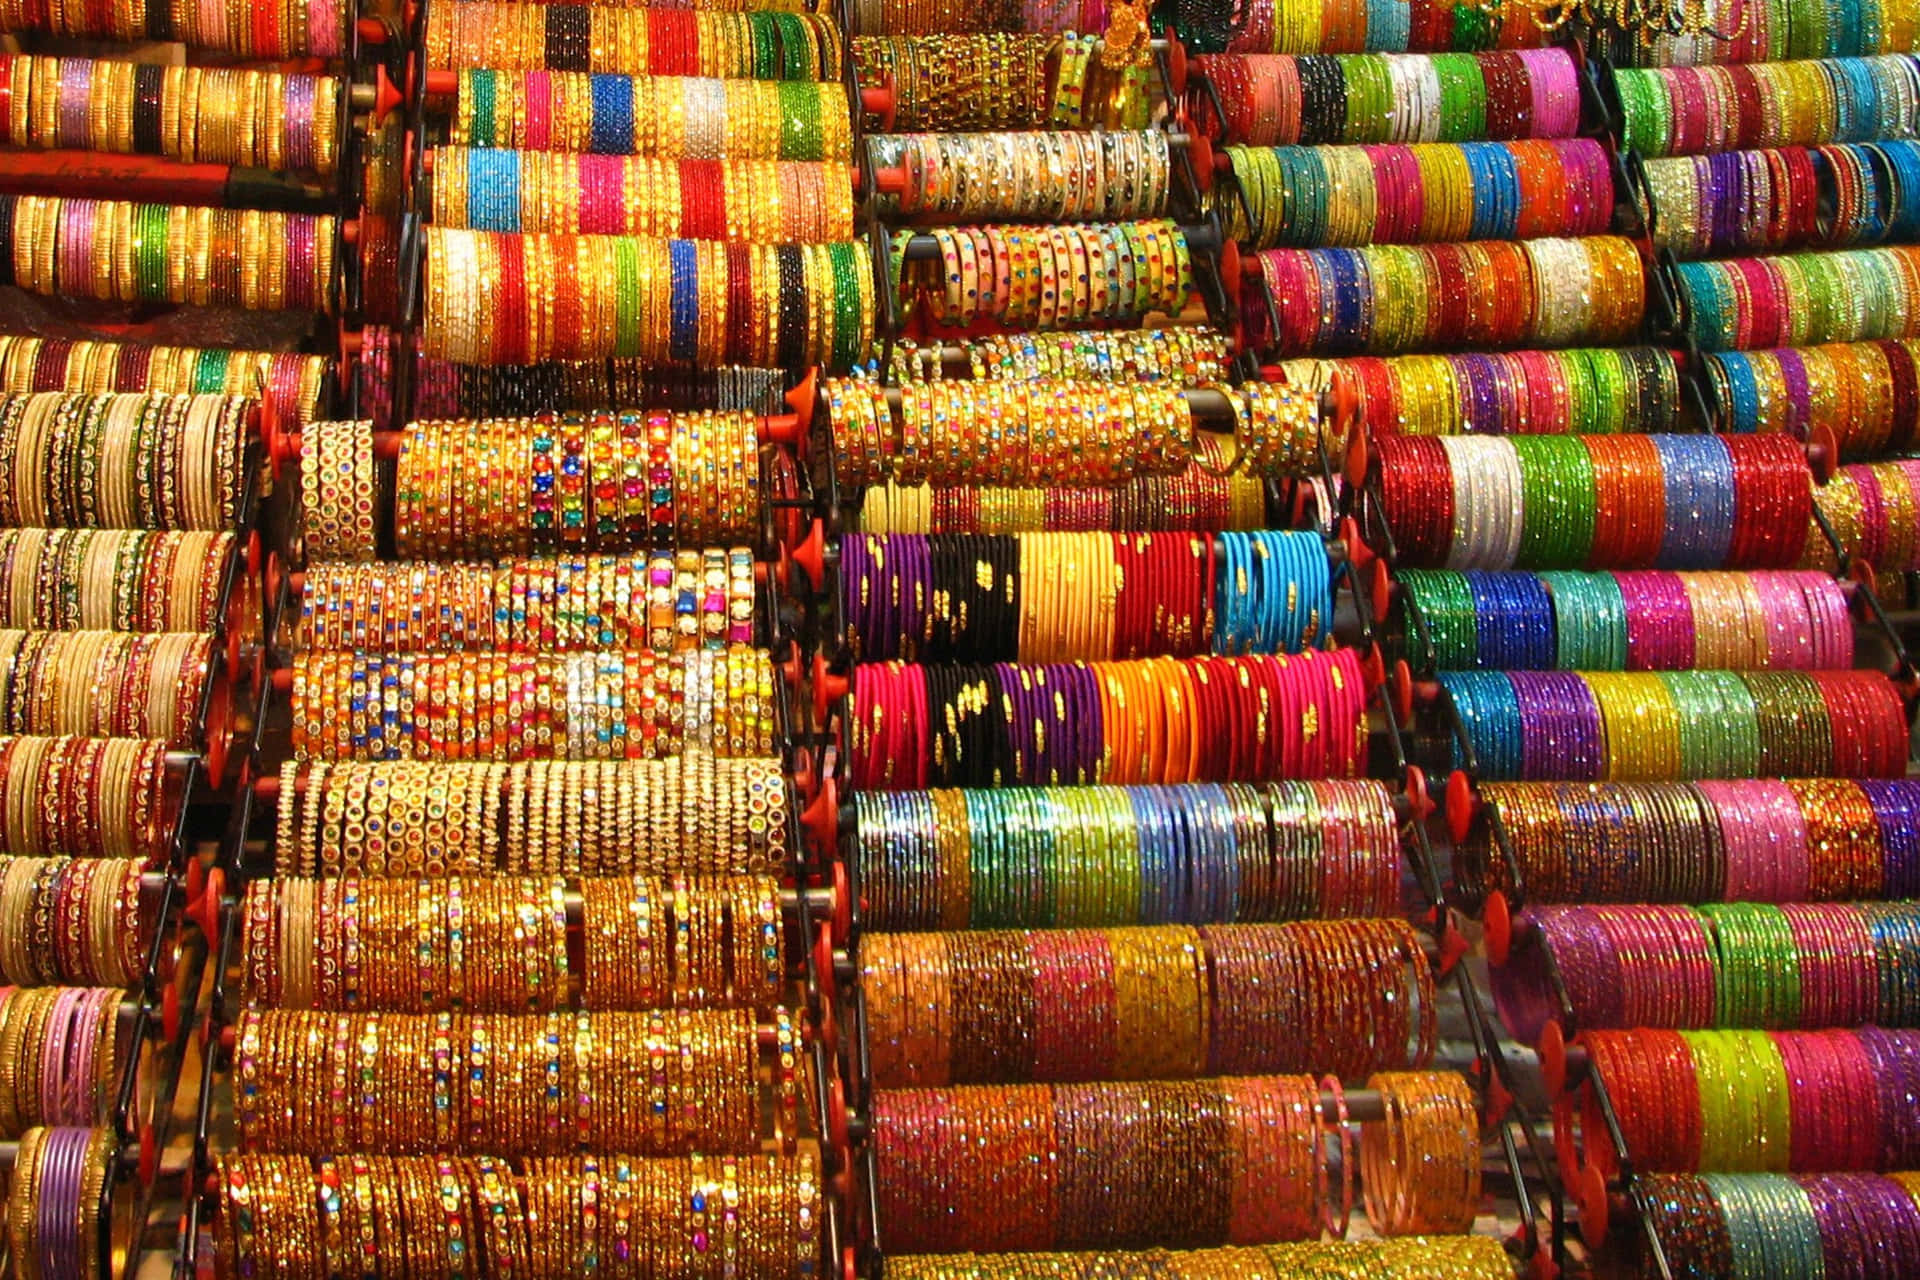 A Display Of Colorful Bangles